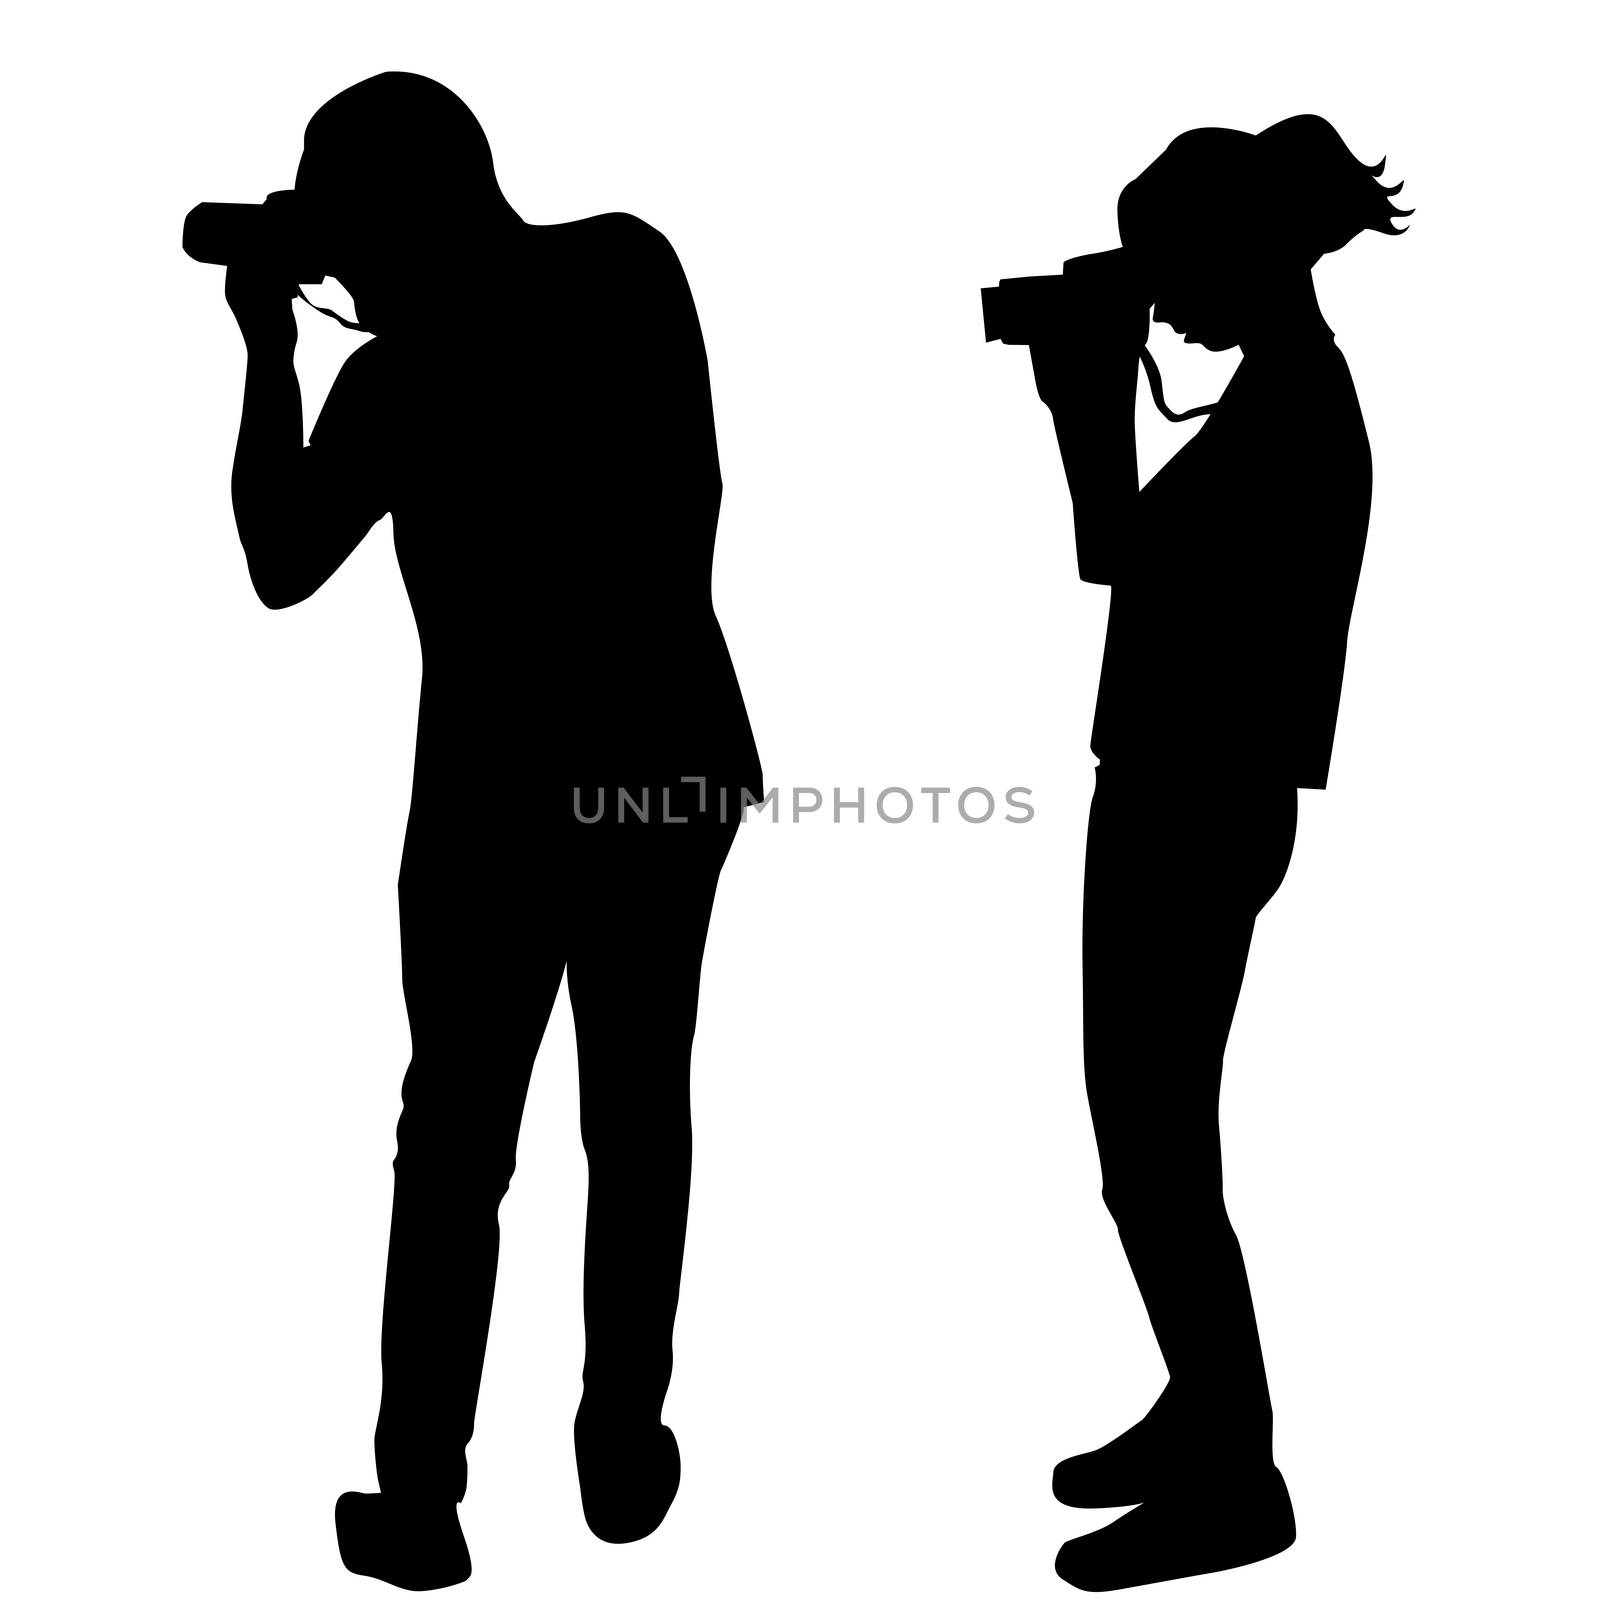 Silhouette of man and woman photographers on white background